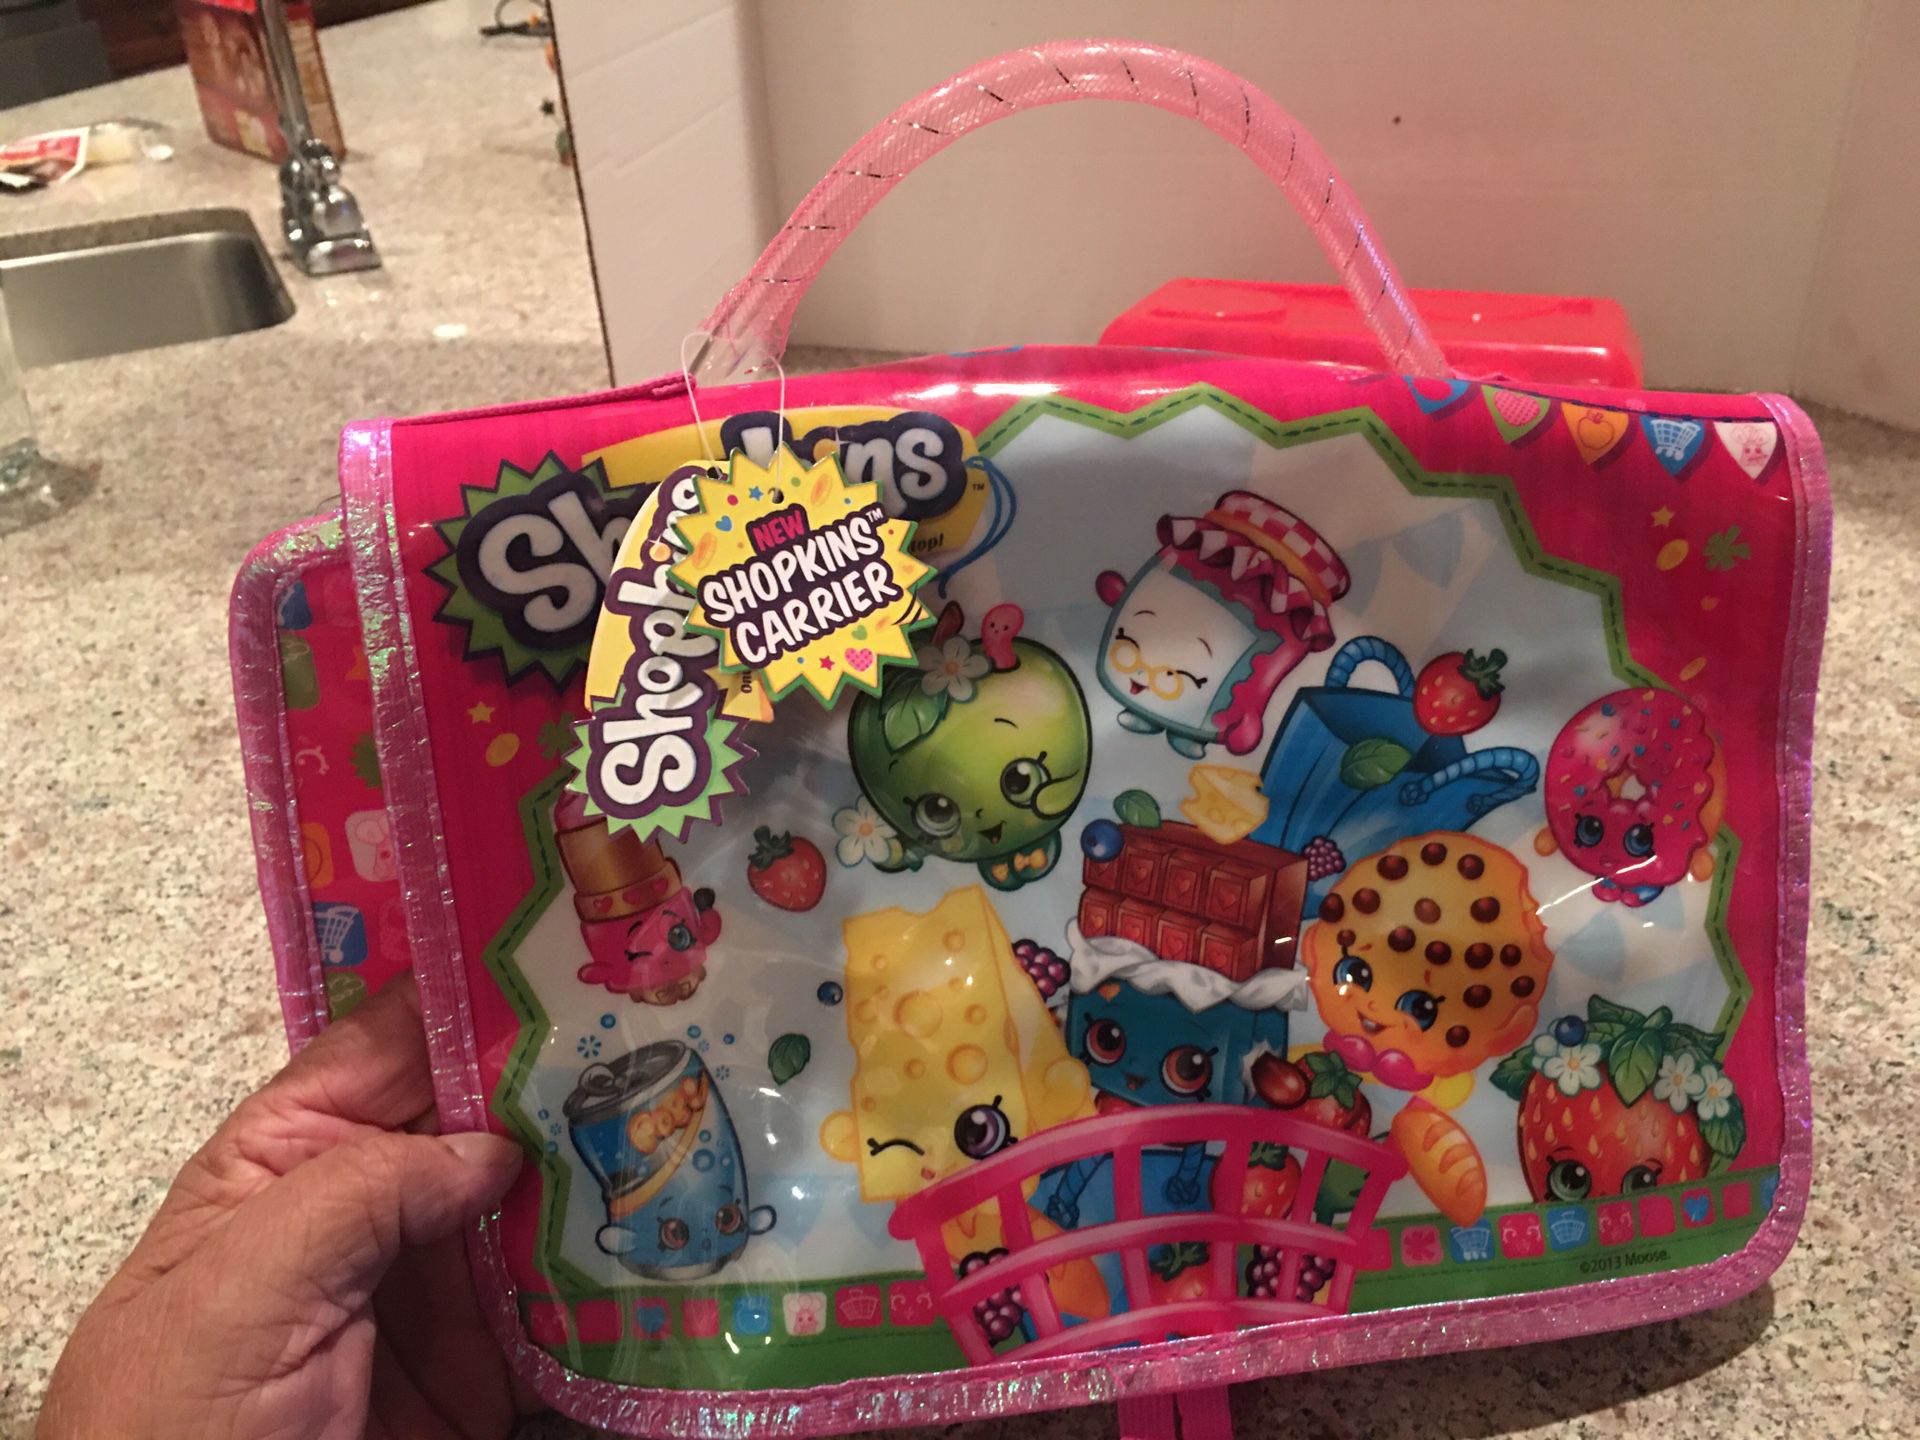 SHOPKINS CARRIER! Large Plastic pouch with zipper and many knit pouches! HOLDS ALOT OF SHOPKINS!!!!